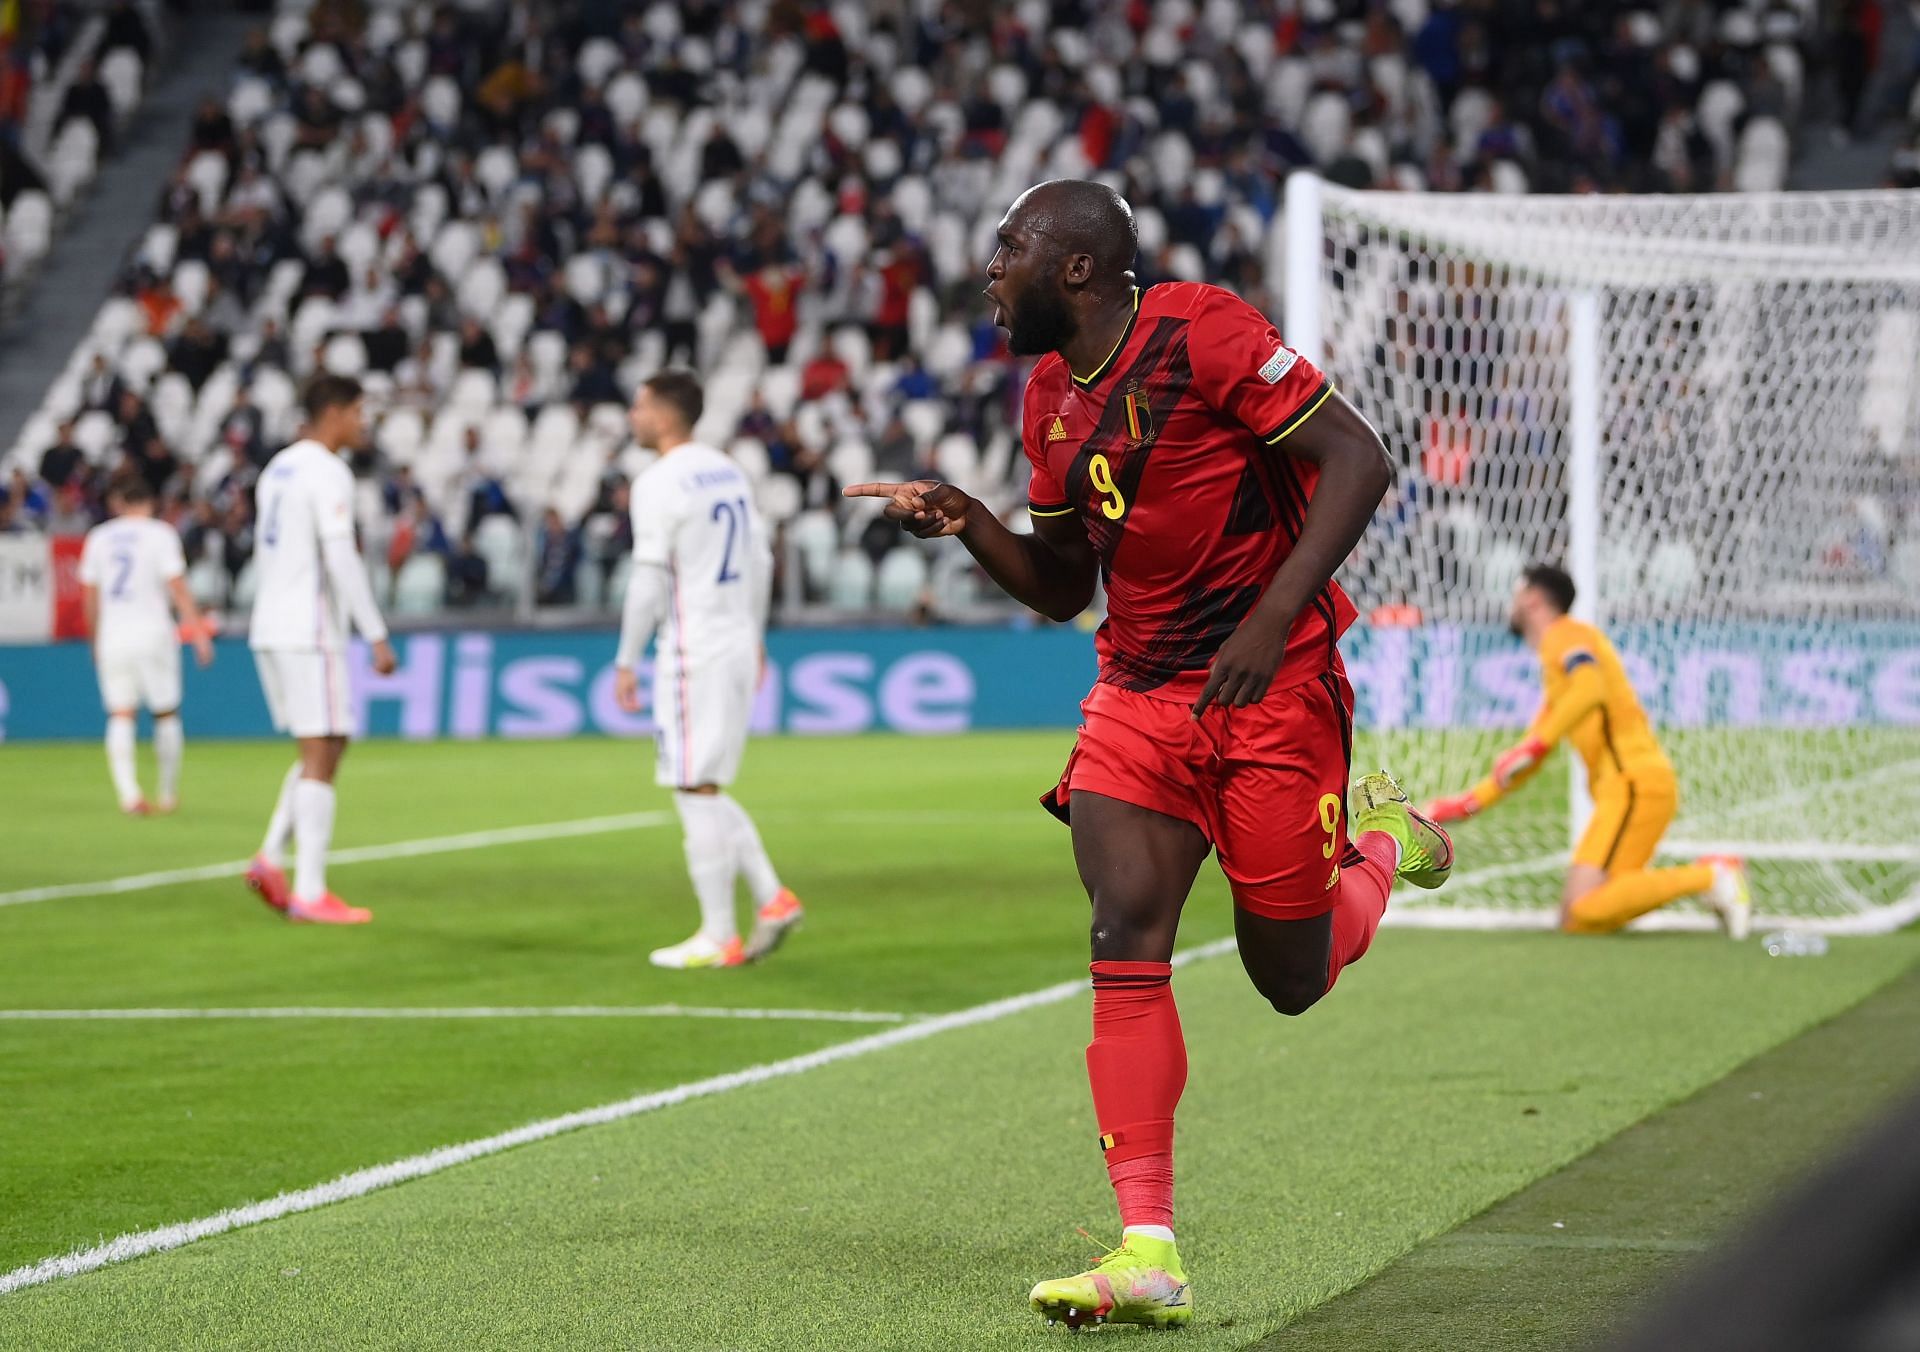 Romelu Lukaku is one of the most valuable injured players at the moment.